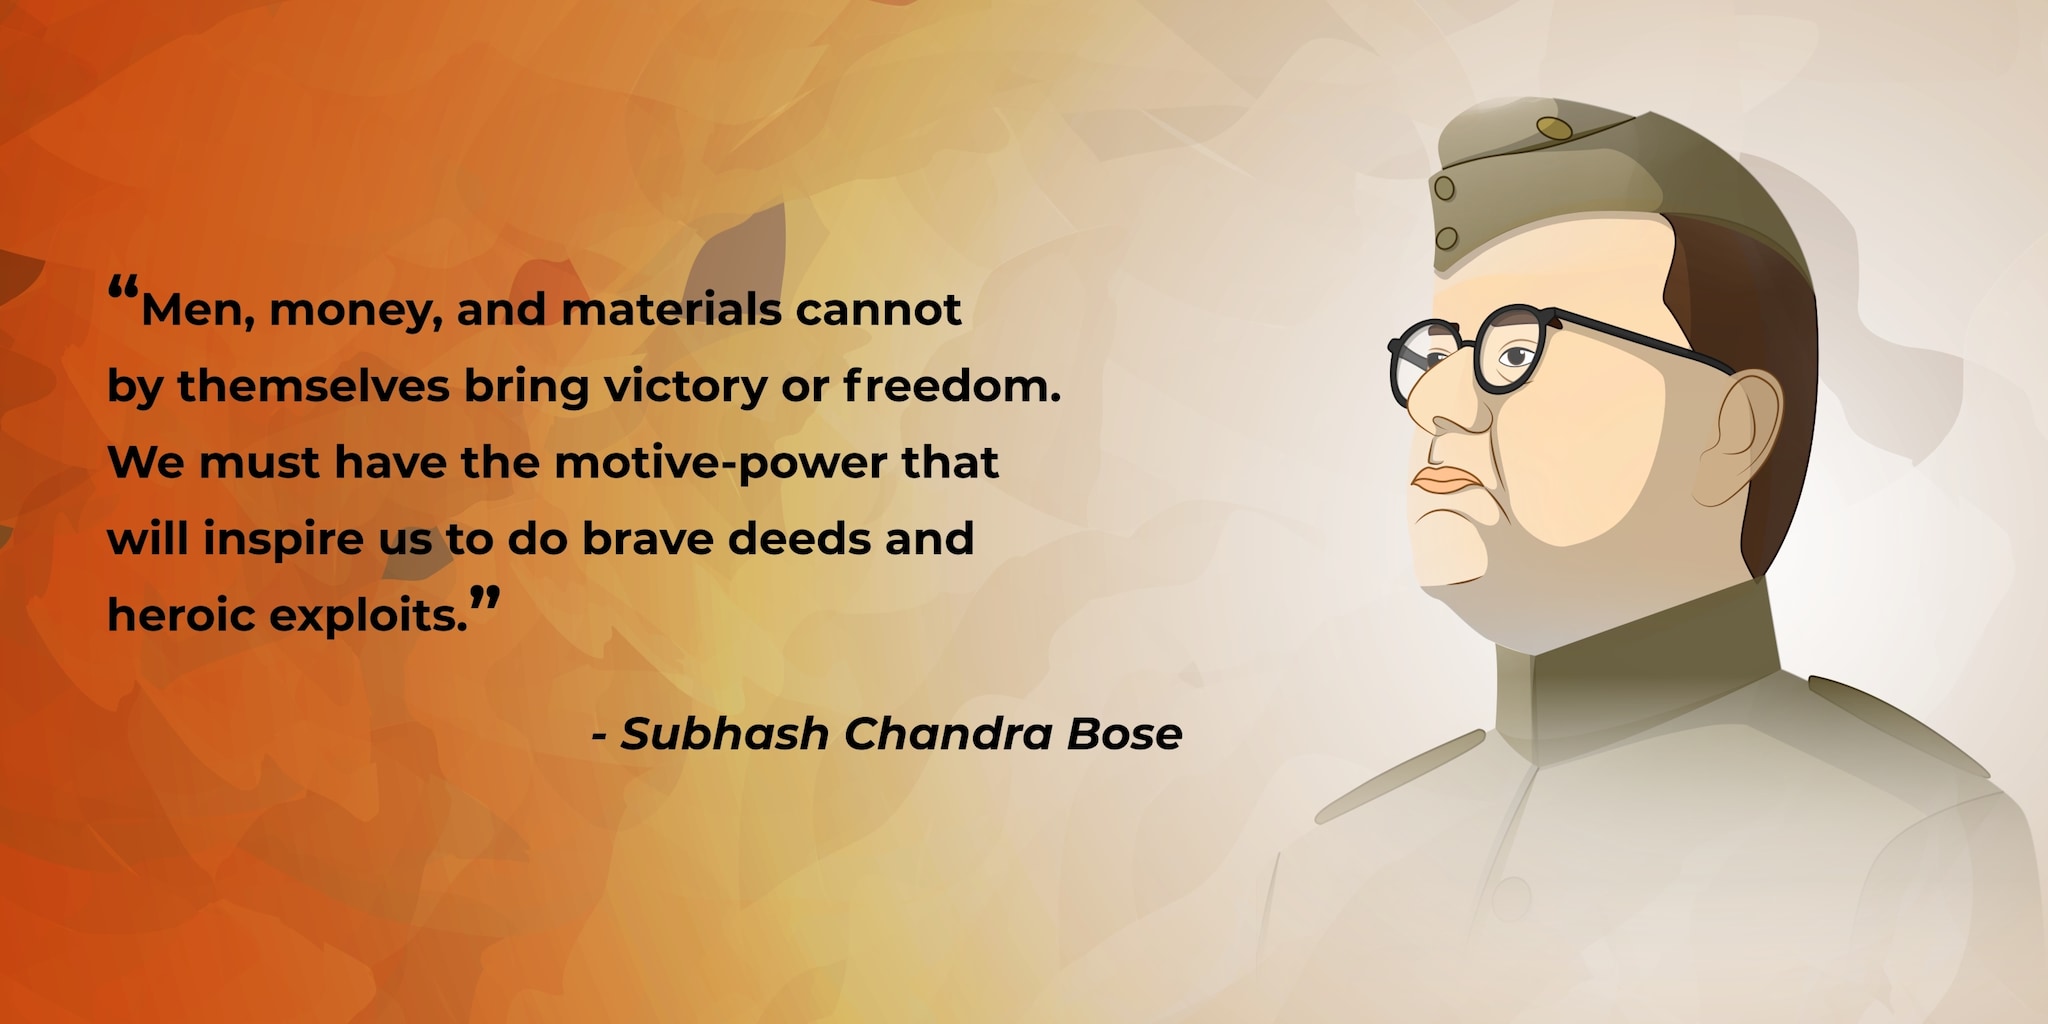 Subhas Chandra Bose Jayanti 2022: Images, Wishes, Quotes, Messages and WhatsApp Greetings to Share. (Image: Shutterstock)